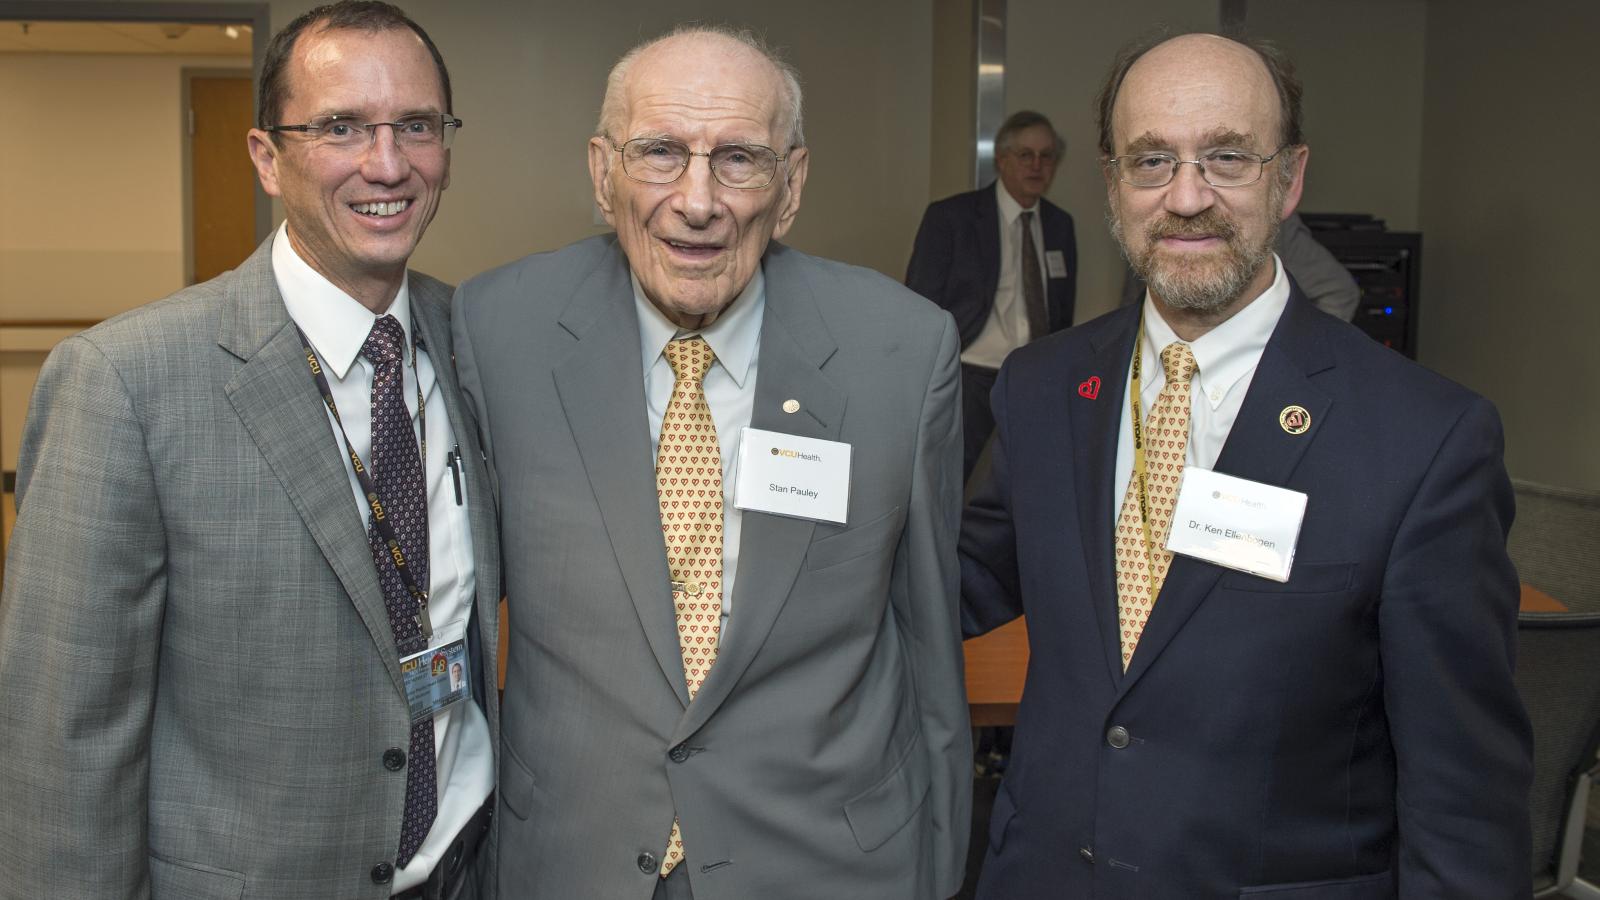 (L to R) Greg Hundley, M.D., director of the Pauley Heart Center; Stan Pauley, longtime VCU Health benefactor; and Kenneth Ellenbogen, M.D., the Martha M. and Harold W. Kimmerling, M.D., Chair of Cardiology, gather to celebrate Stan and his family’s generosity and impact on Central Virginia. Photos: Kevin Morley, VCU University Marketing